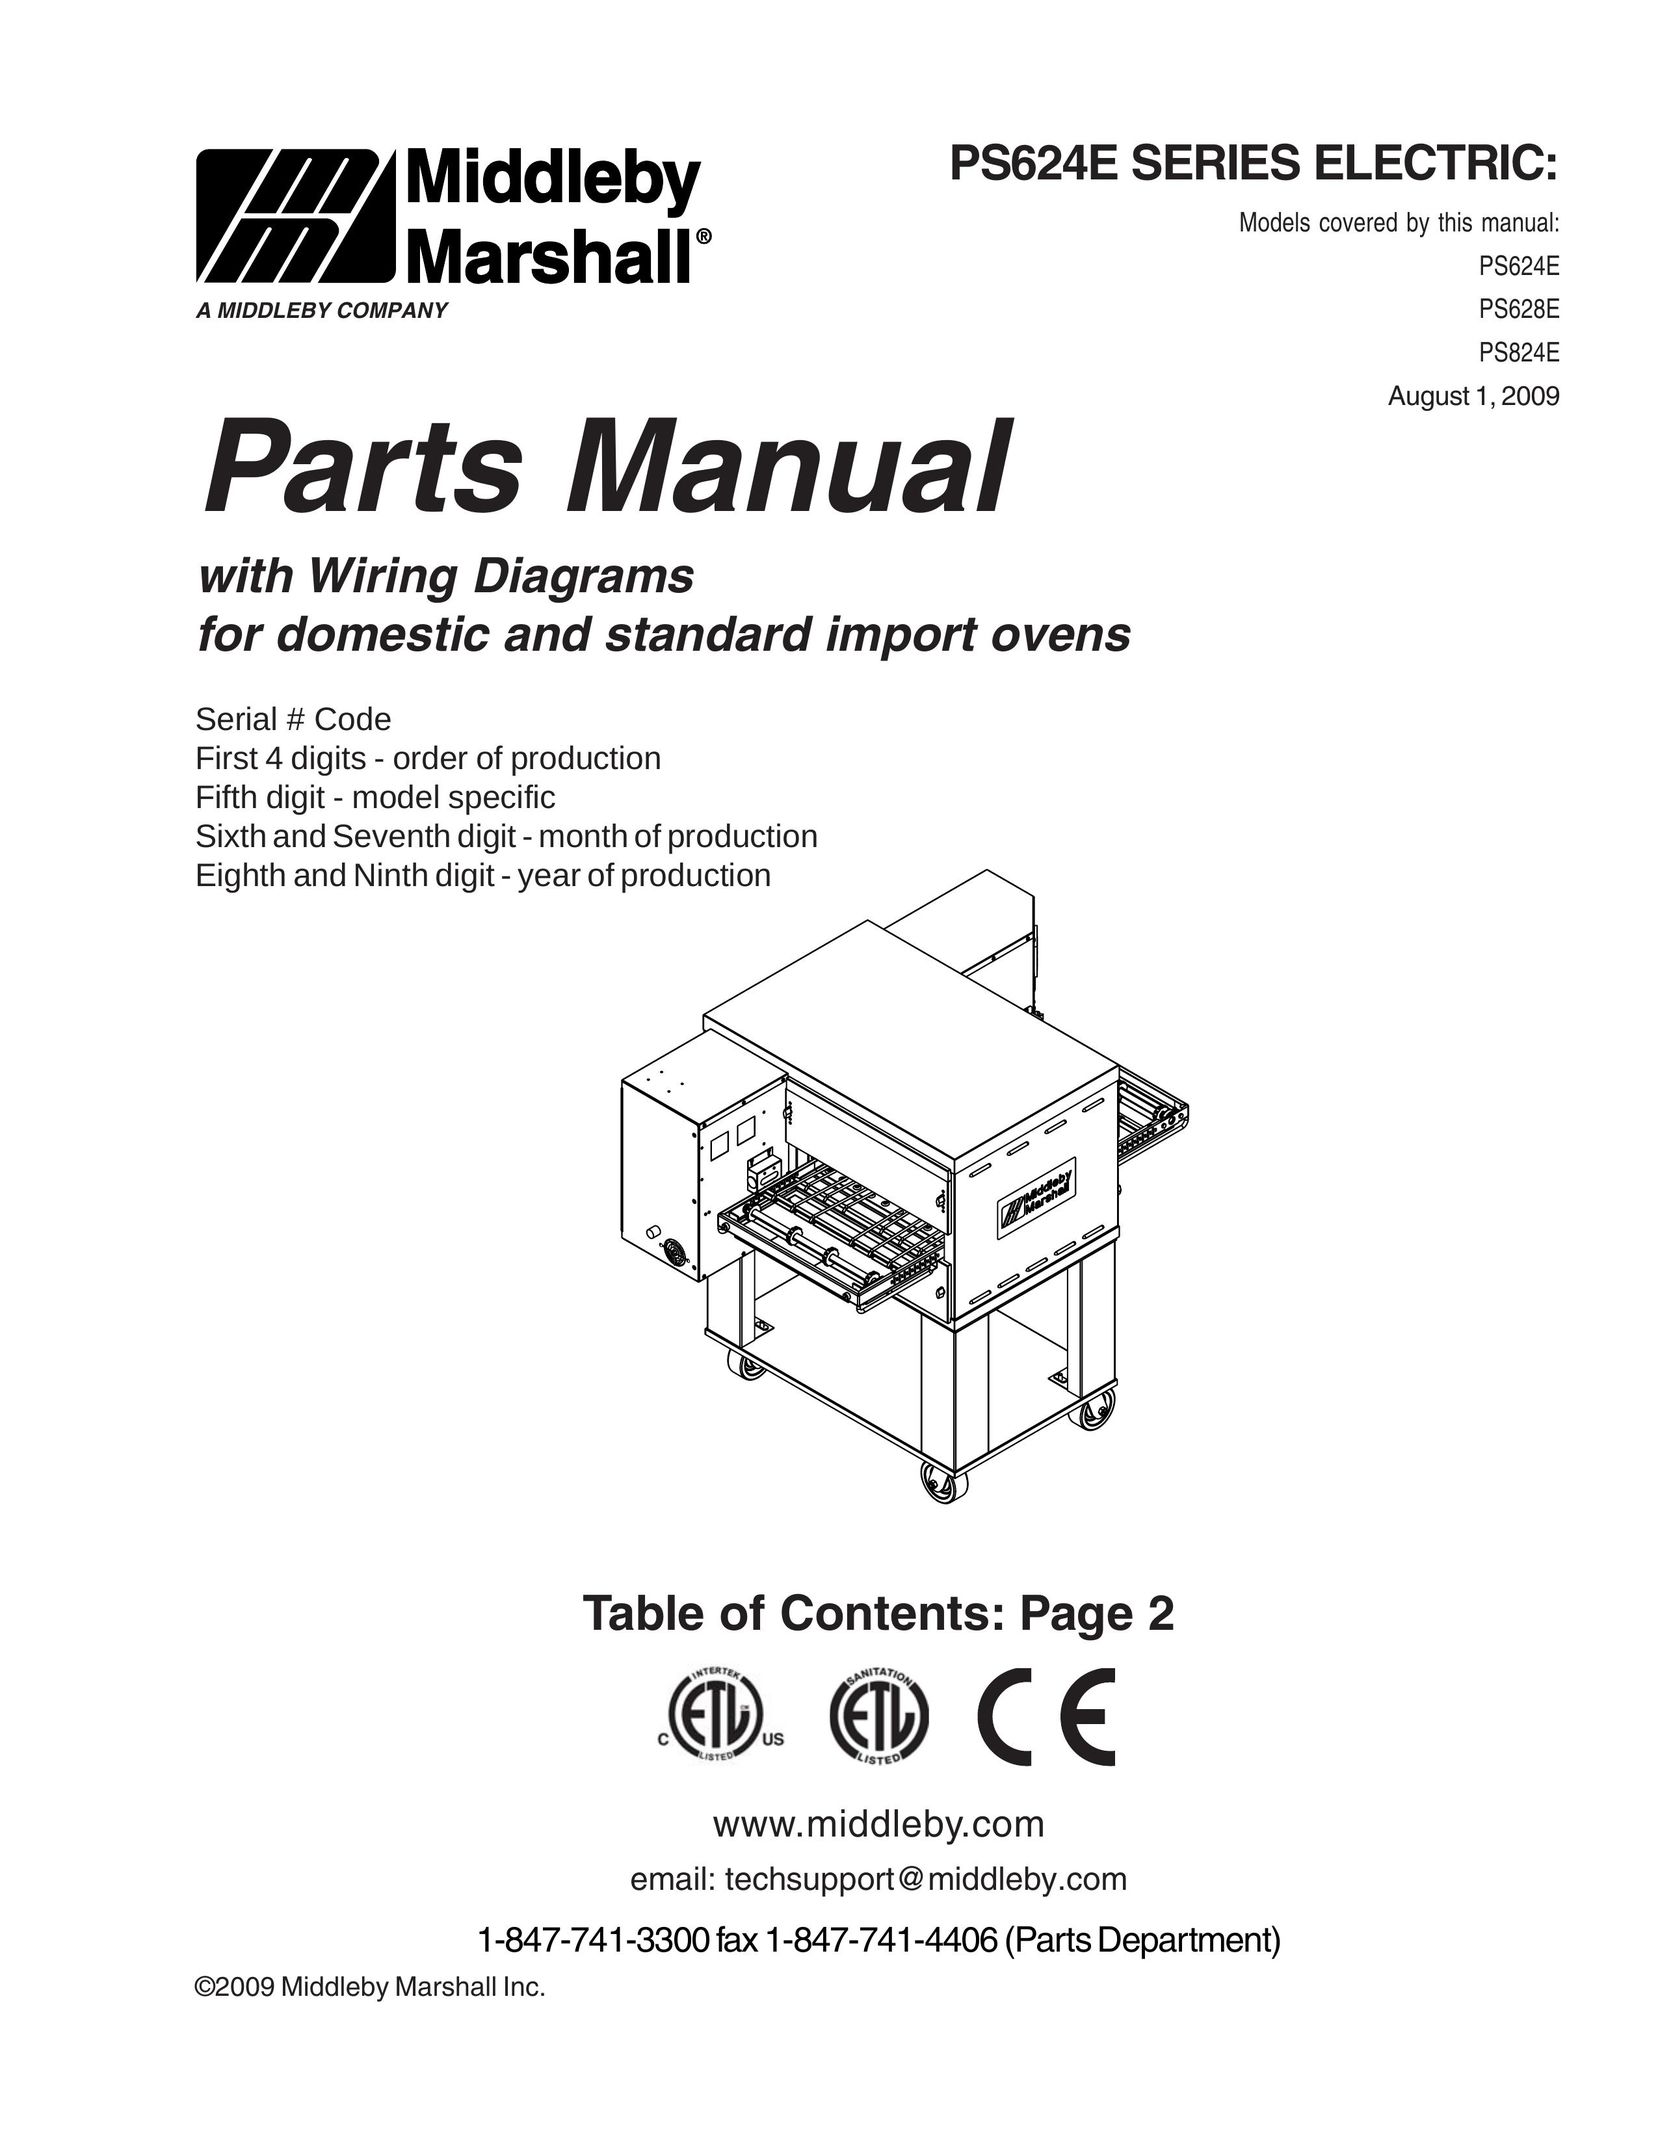 Middleby Marshall PS624E Series CRT Television User Manual